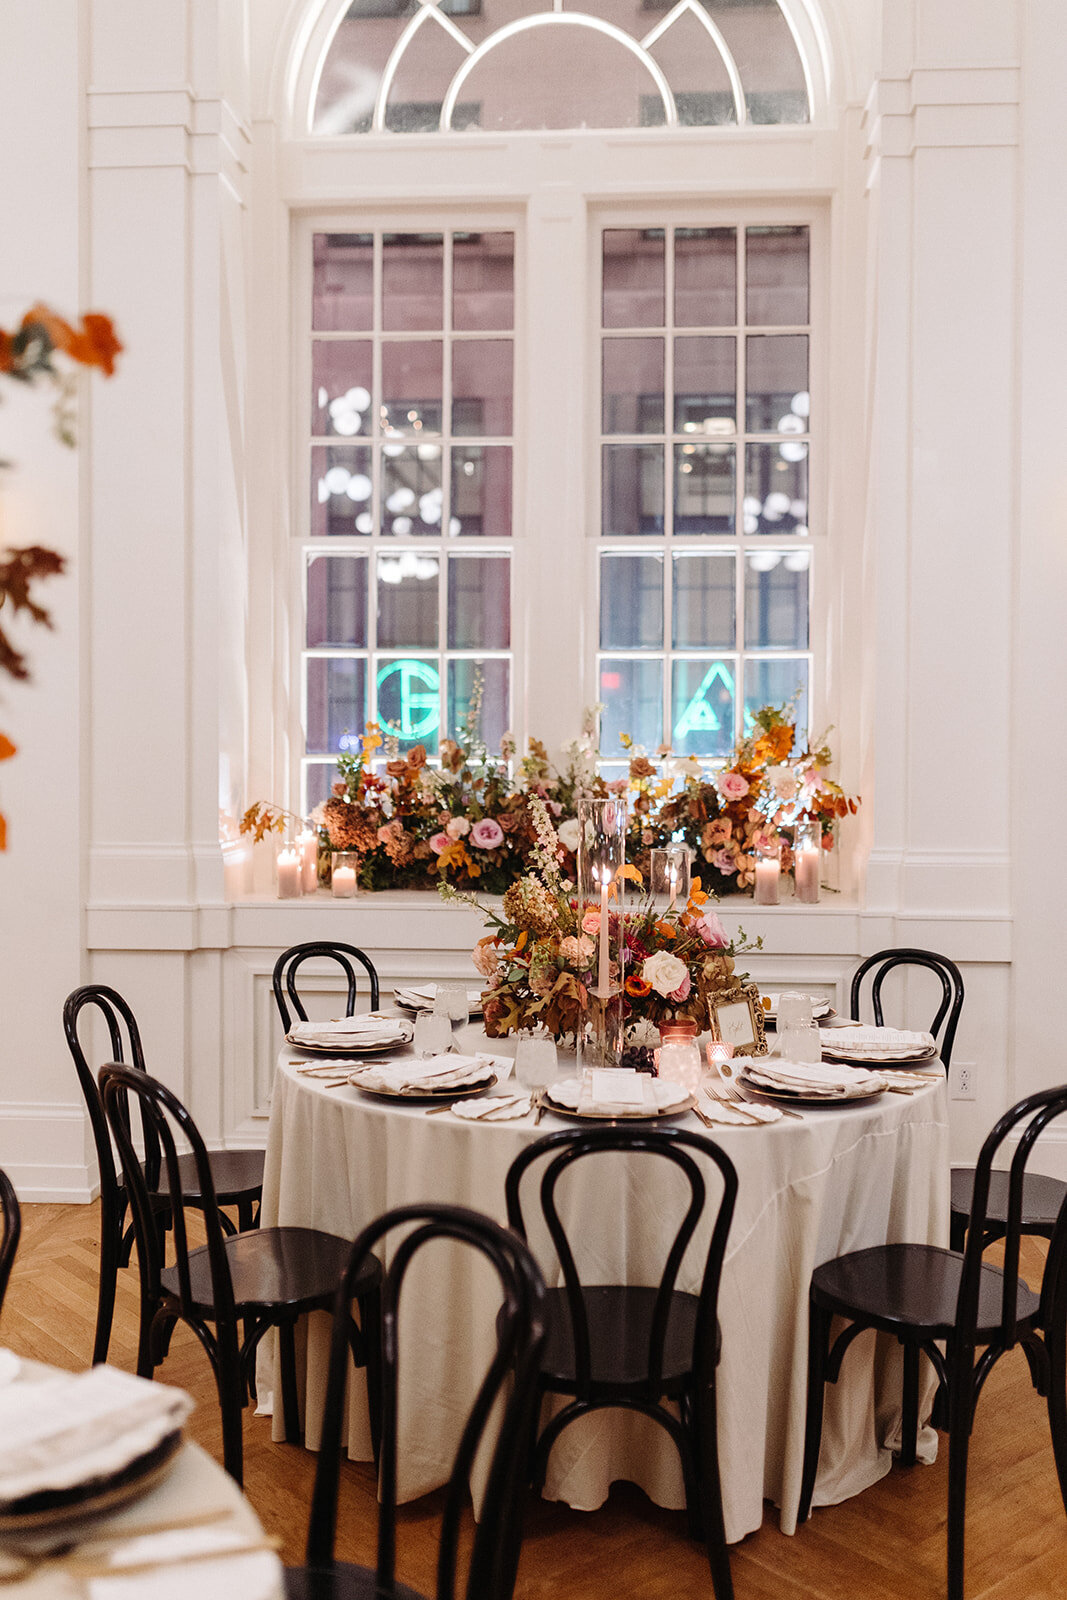 Organic floral centerpieces decorate this autumnal Parisian inspired wedding reception in hues of dusty rose, burgundy, terra cotta, and lavender composed of roses, ranunculus, delphinium, lisianthus, copper beech, and fall foliage. Design by Rosemary and Finch in Nashville, TN.